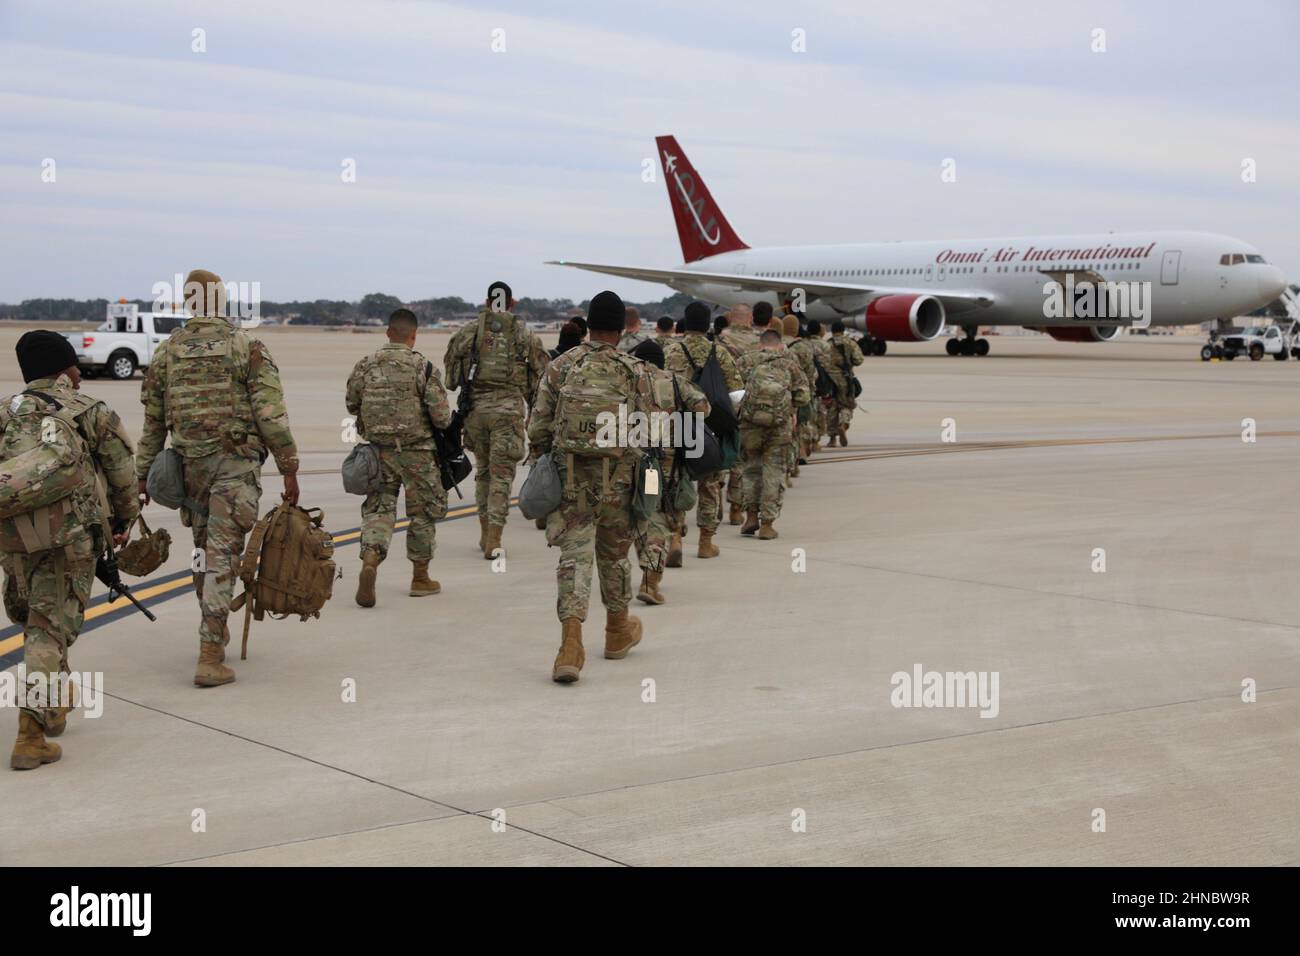 Fort Bragg, United States. 08 February, 2022. U.S. Army paratroopers from the 82nd Airborne Division and the 18th Airborne Corps load onto an Omni Air International charter aircraft February 8, 2022 at Fort Bragg, North Carolina. The soldiers are deploying to Eastern Europe in support of NATO allies and deter Russian aggression toward Ukraine. Credit: Sgt. Brian Micheliche/U.S Army/Alamy Live News Stock Photo